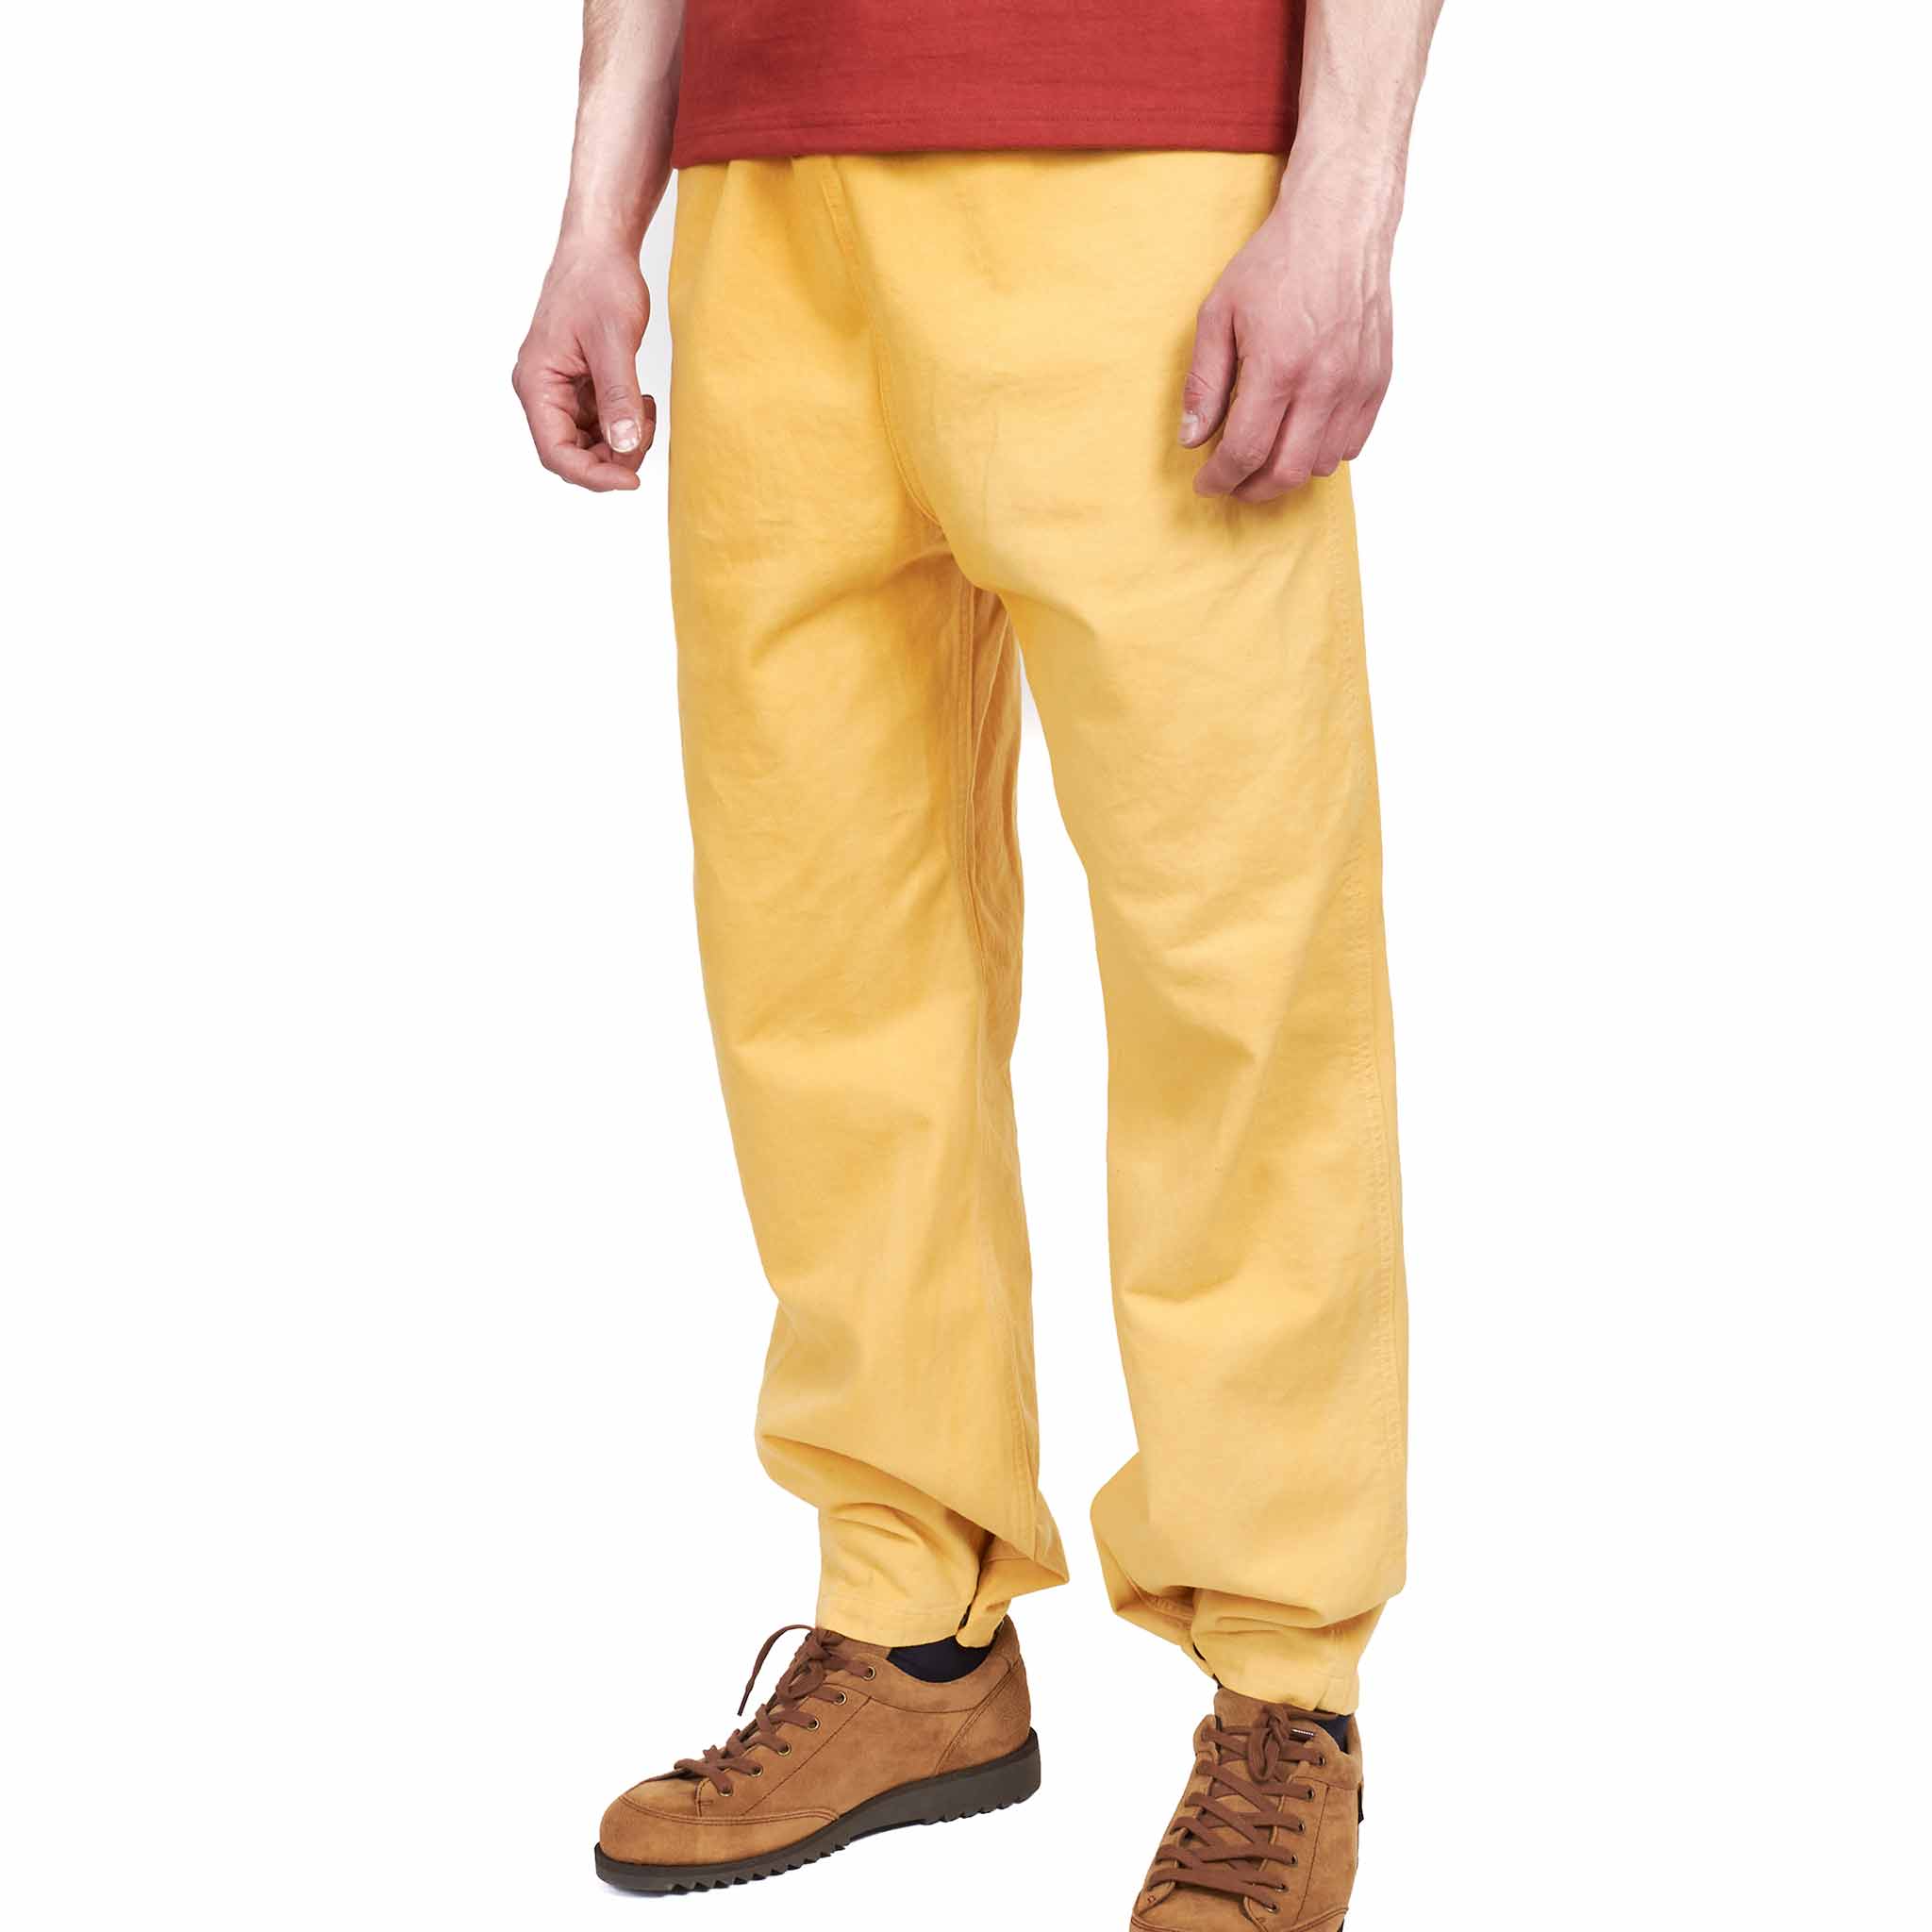 The Real McCoy's MP21019 USN Salvage Trousers (Over-Dyed) Yellow cinched